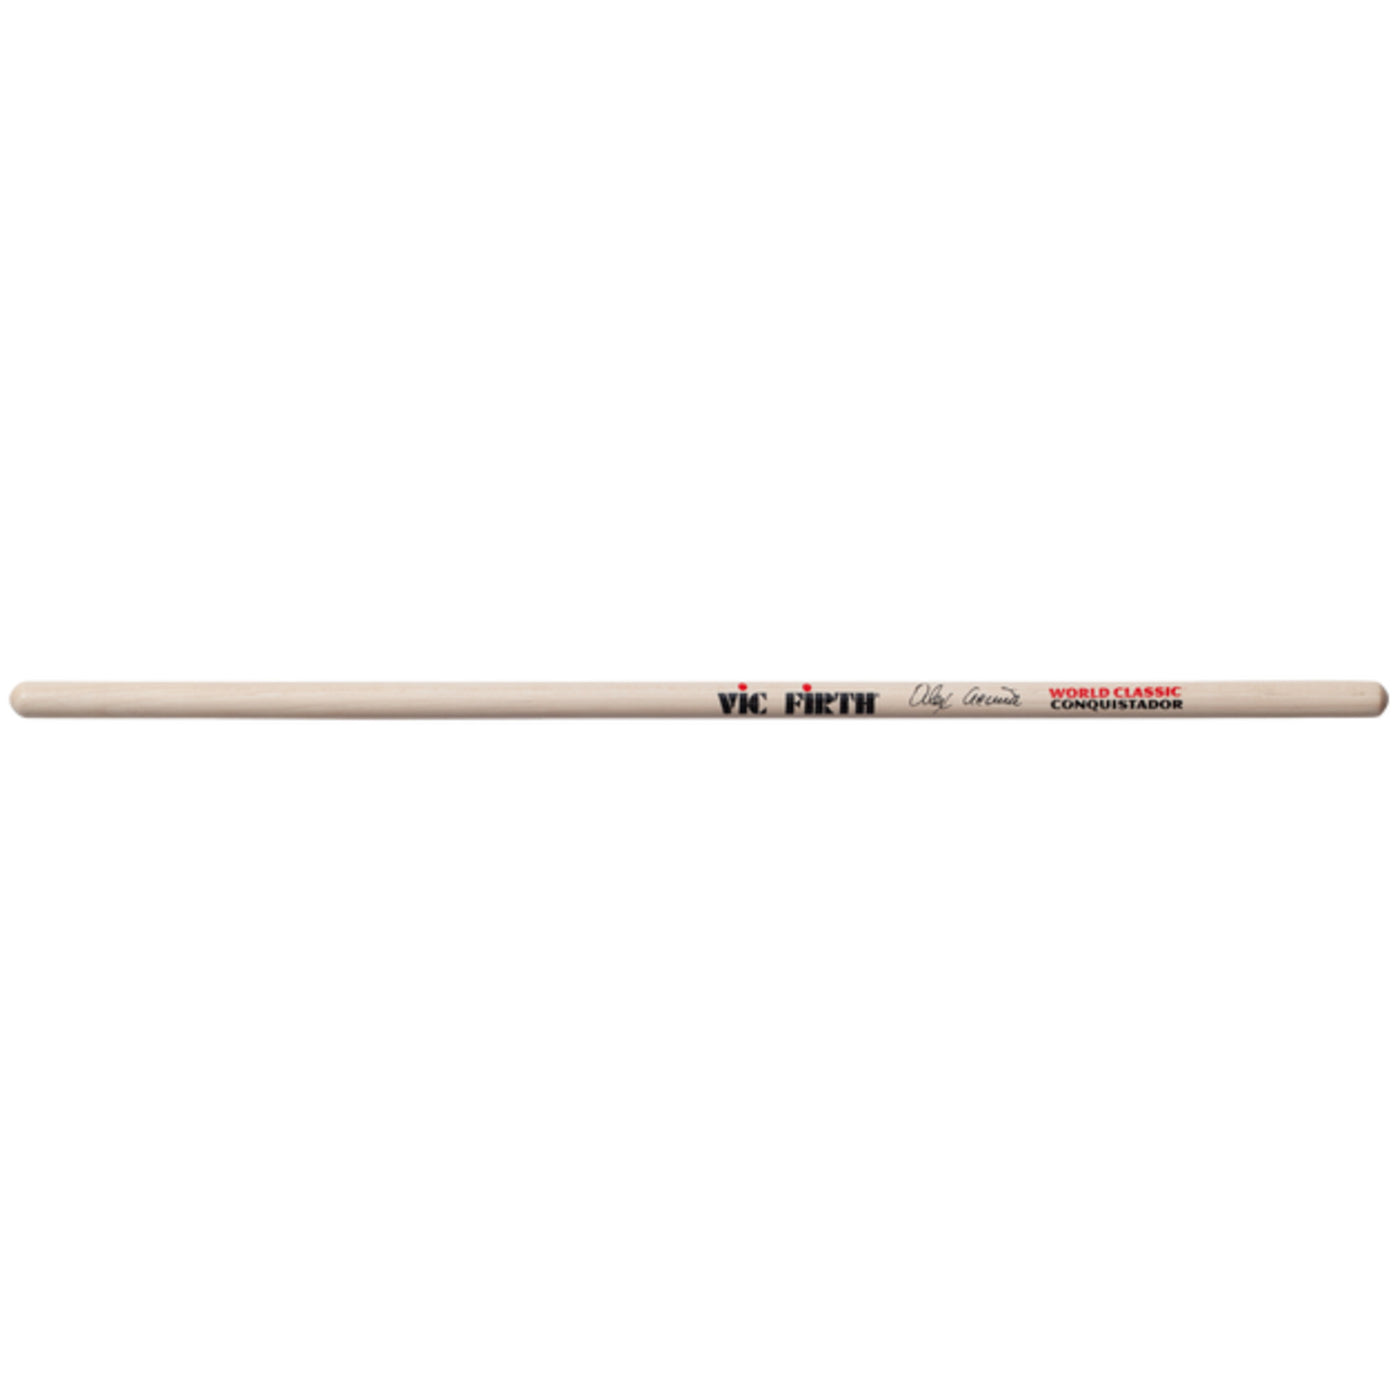 Vic Firth World Classic - Alex Acuña Conquistador (Clear) Timbale Drumstick (SAAC)